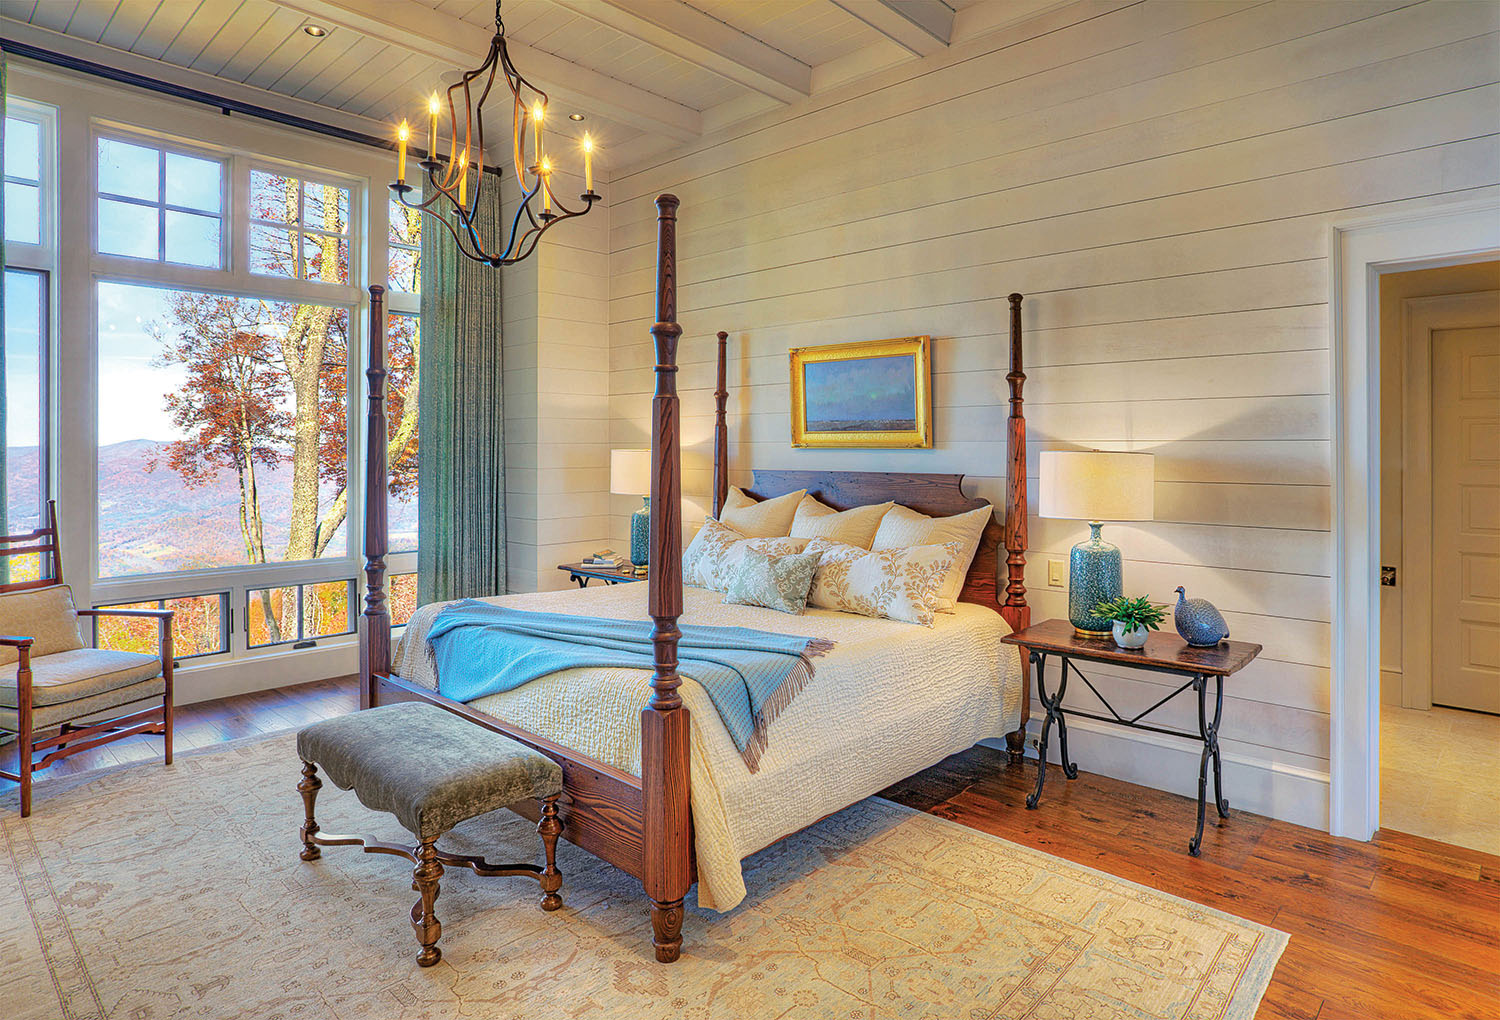 The four-poster bed in the master bedroom is custom made. The drapery fabric is Kerry Joyce Textiles through Ambiance Interiors. Rug is from Togar. Photo by Jerry Markatos 